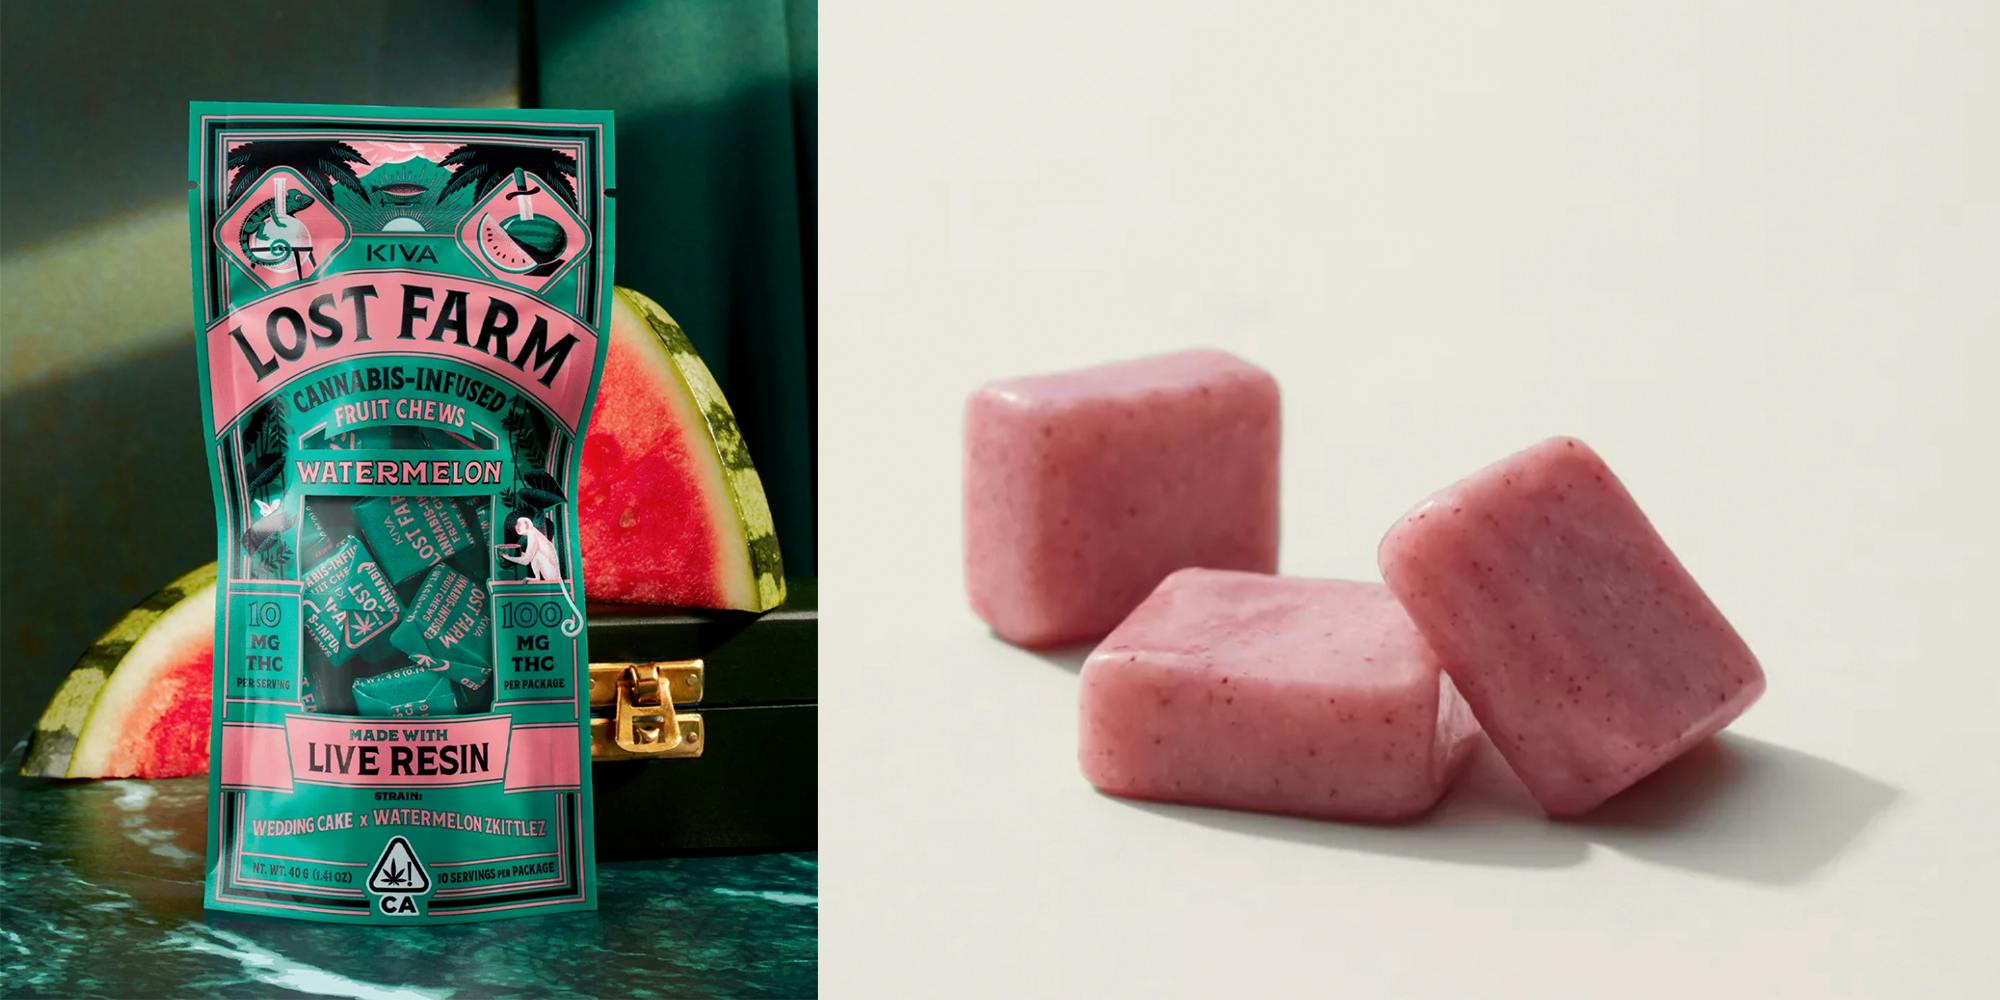 Kiva Confections' Lost Farm Watermelon Chews infused with THC.